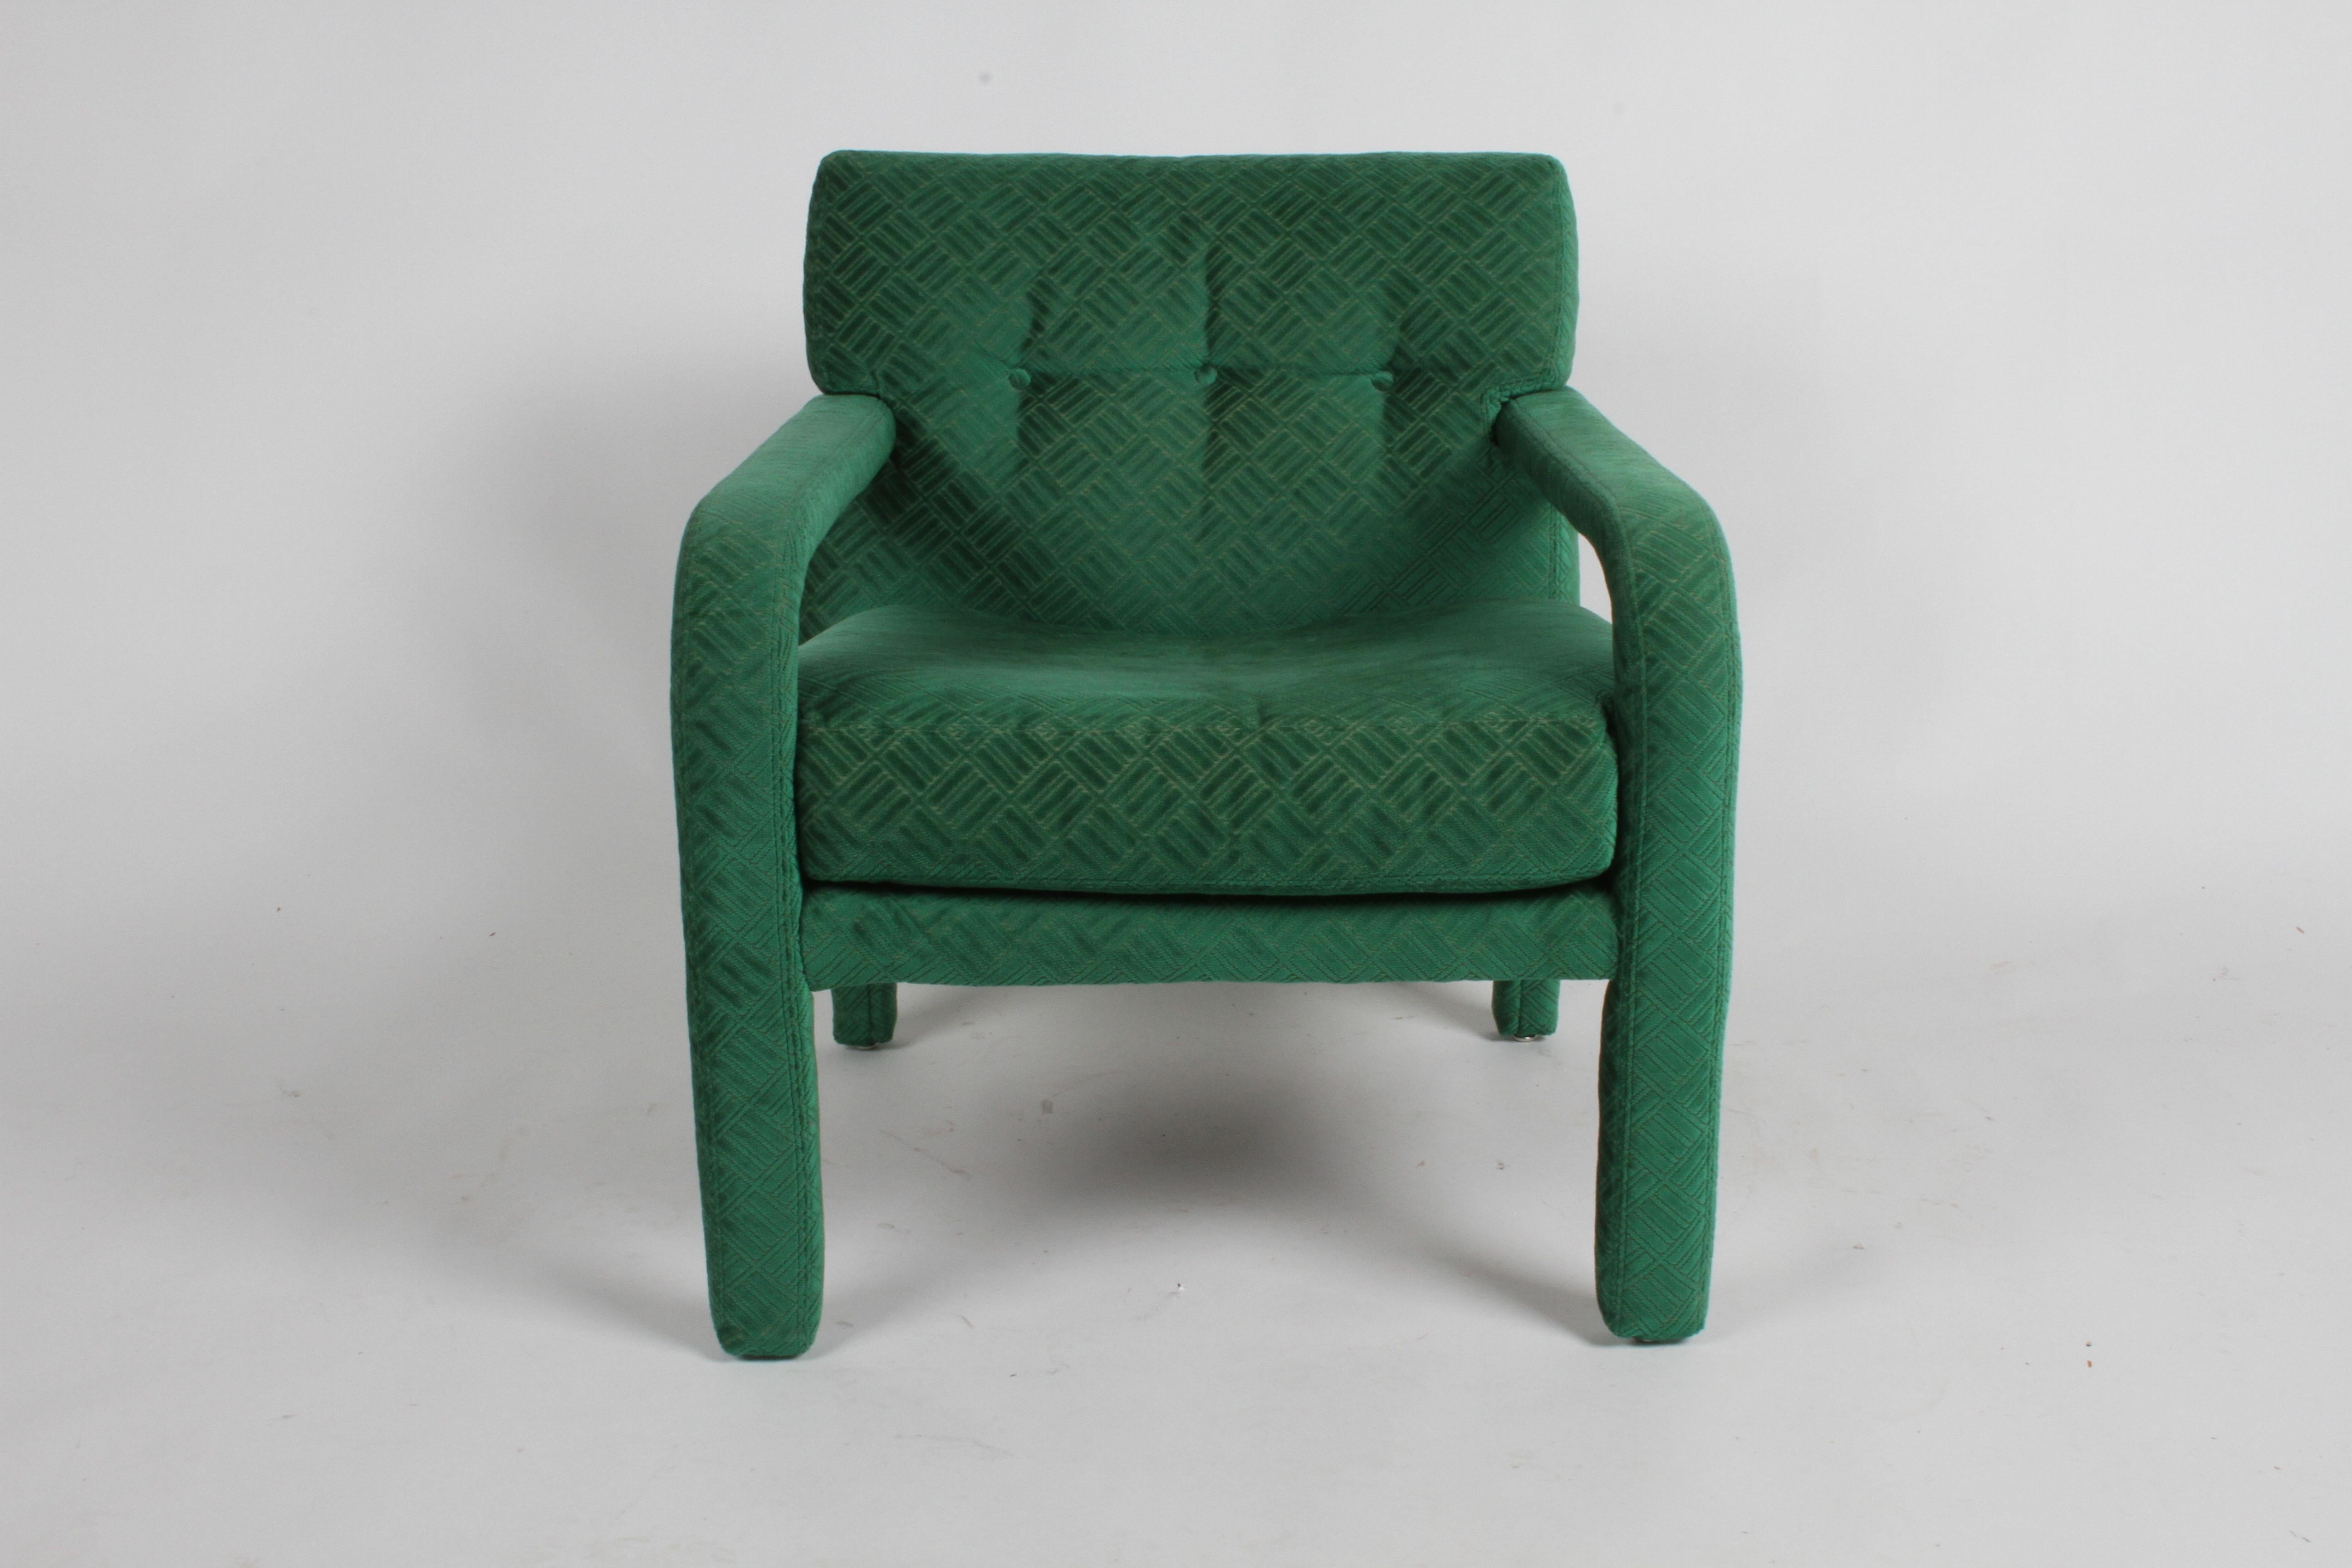 Mid-Century Modern Pair of 1970s Directional Lounge Chairs in a Textured Emerald Green Upholstery